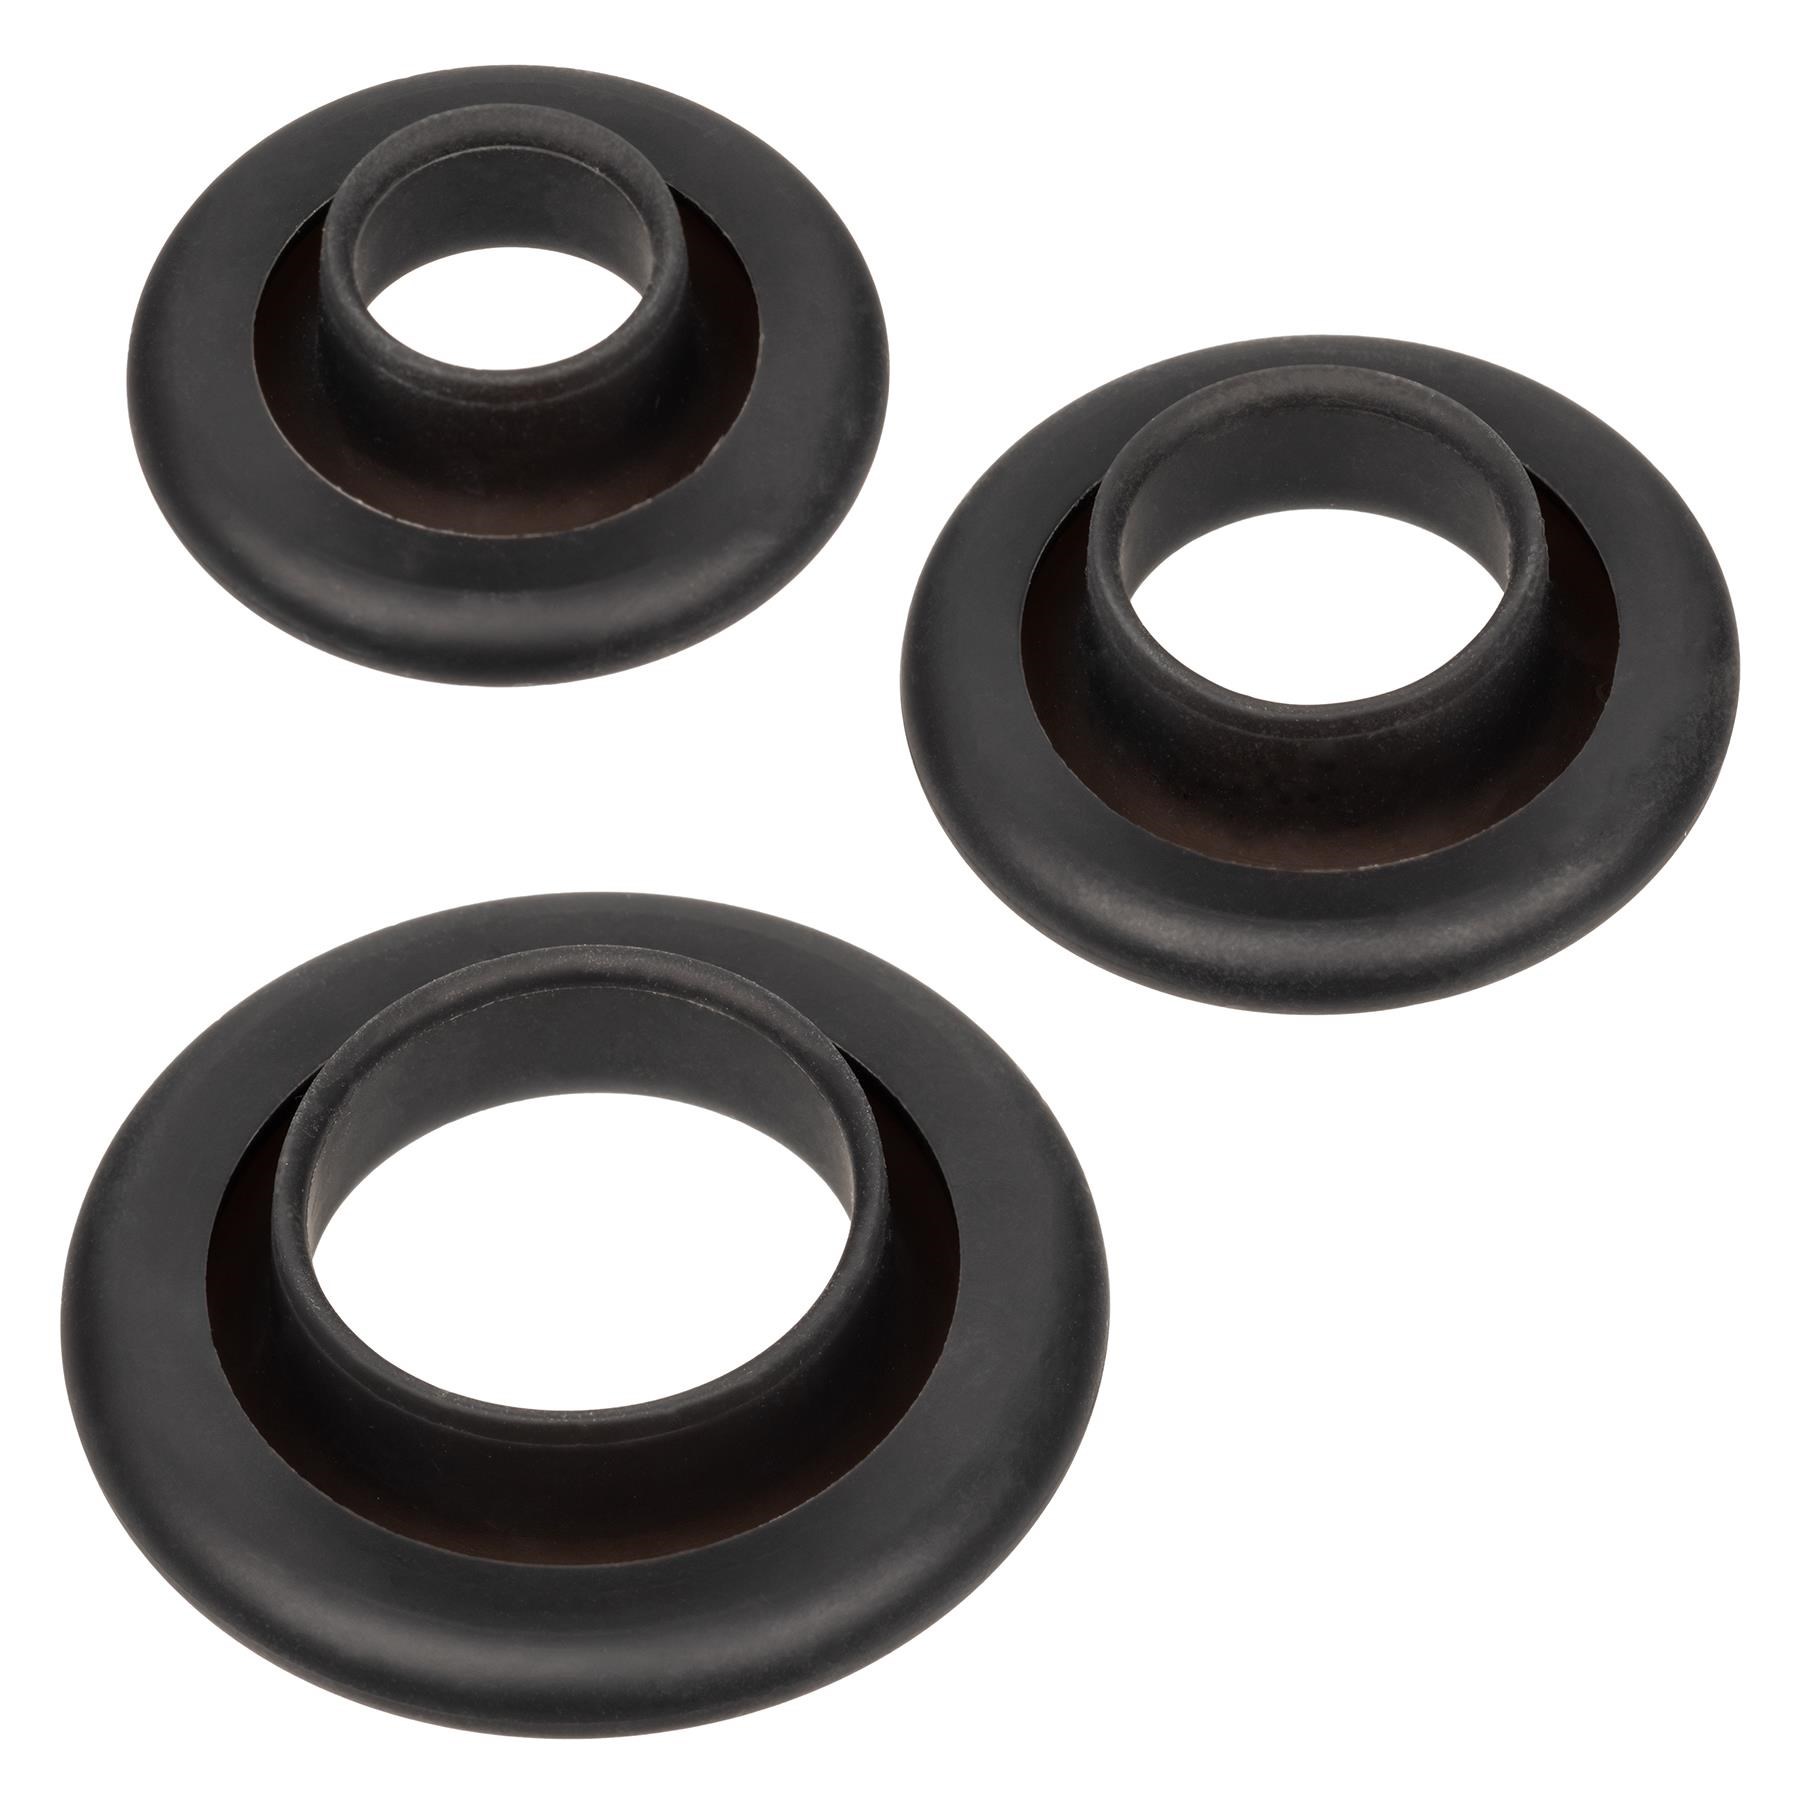 Boundless Body Pump Kit - Cup Rings